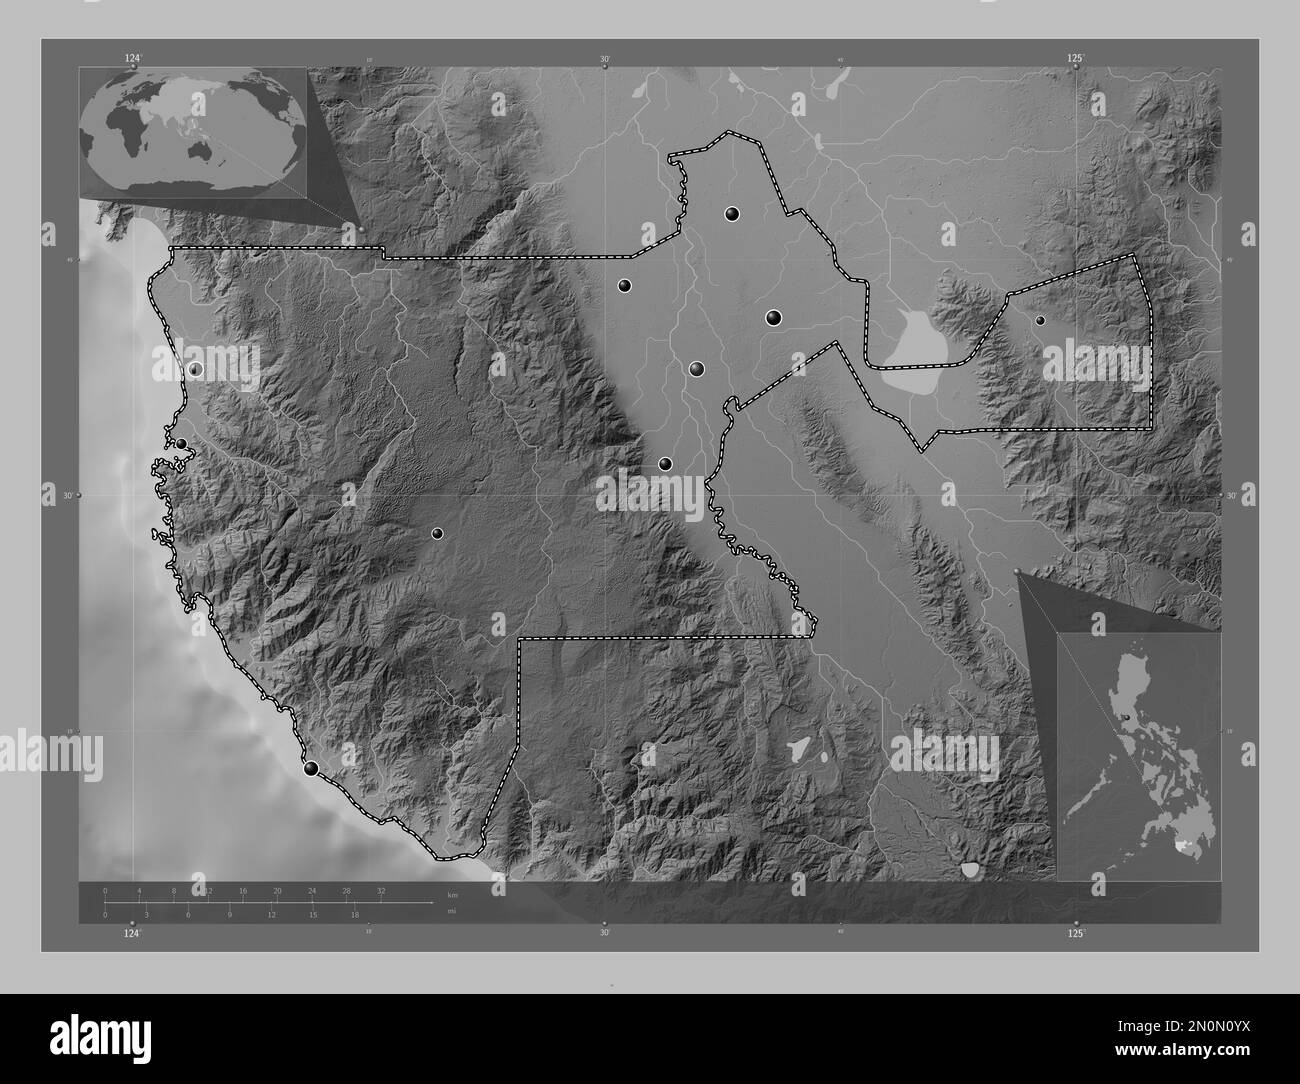 Sultan Kudarat, province of Philippines. Grayscale elevation map with lakes and rivers. Locations of major cities of the region. Corner auxiliary loca Stock Photo